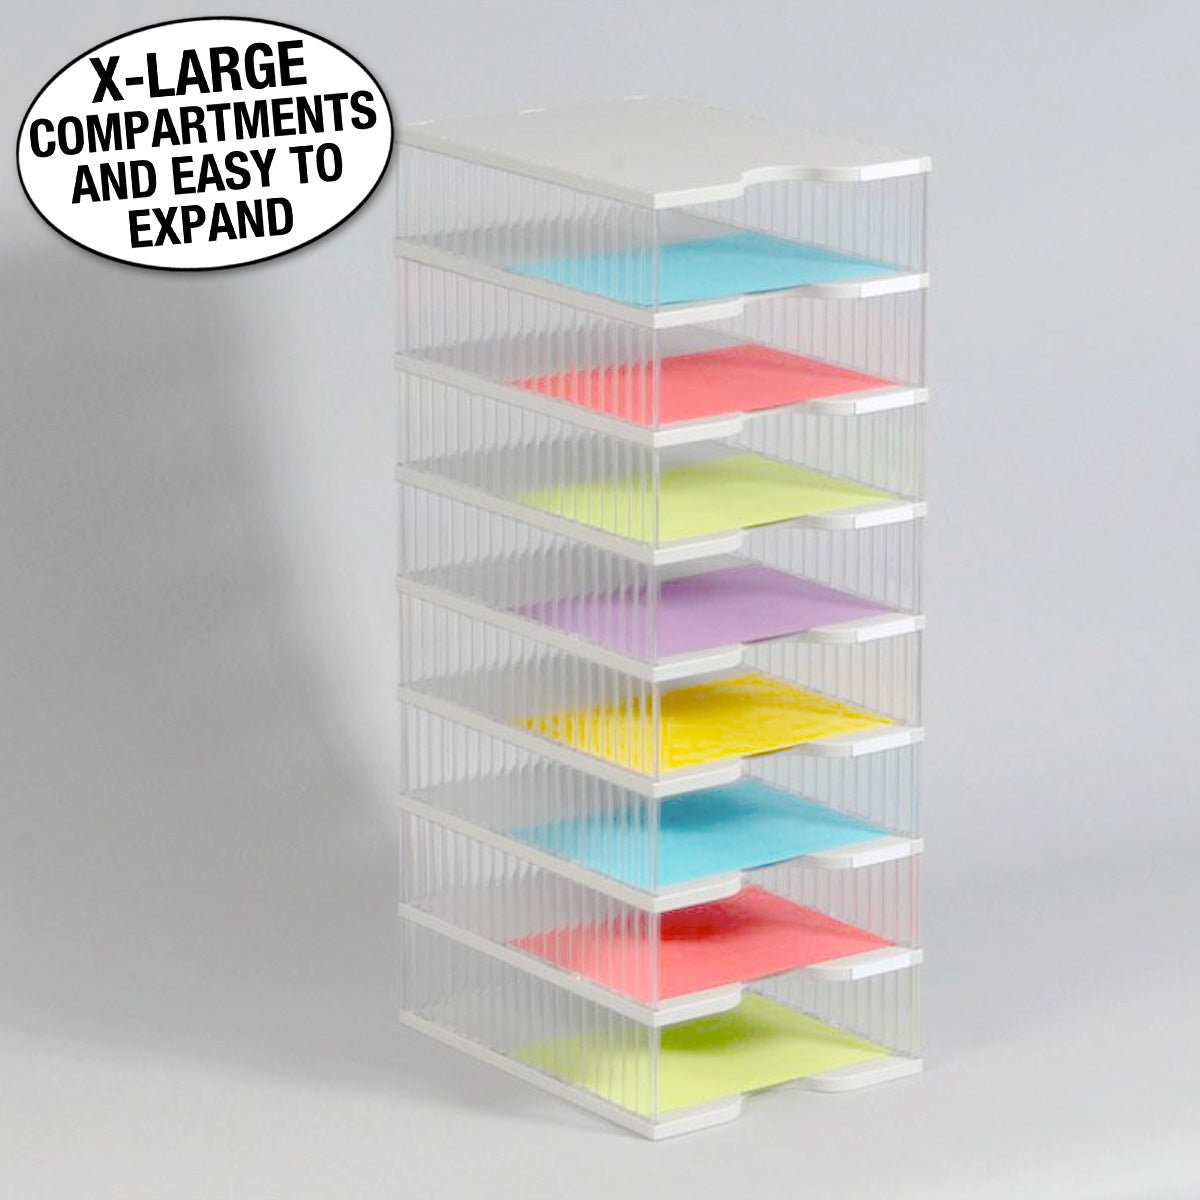 Desktop Organizer 9 Letter Tray Sorter With 8 Slot Vertical File Topper -  Ultimate Office TierDrop Organizer Stores All of Your Documents Files